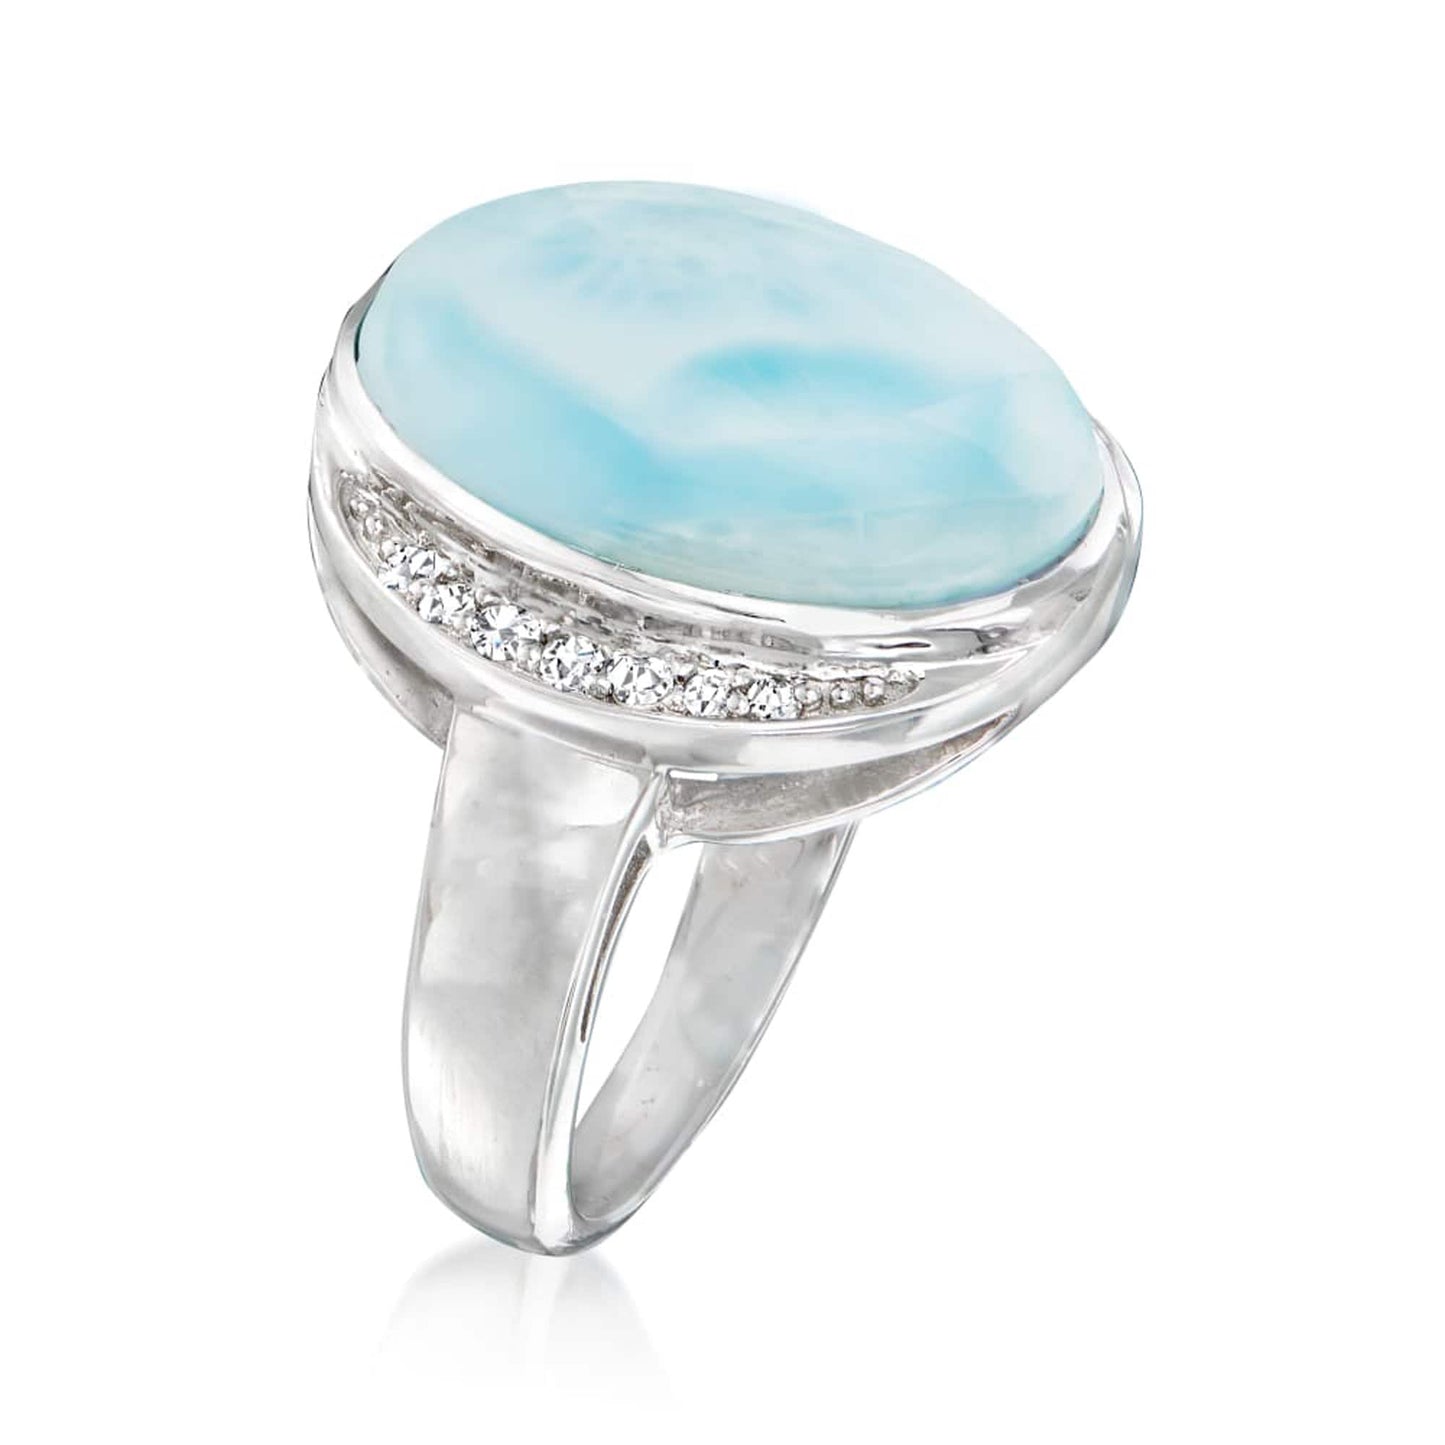 Larimar With White Zircon Ring, 925 Sterling Silver Ring, Engagement Ring, Birthstone Ring-Gemstone Jewelry Anniversary Gift-Gift For Her